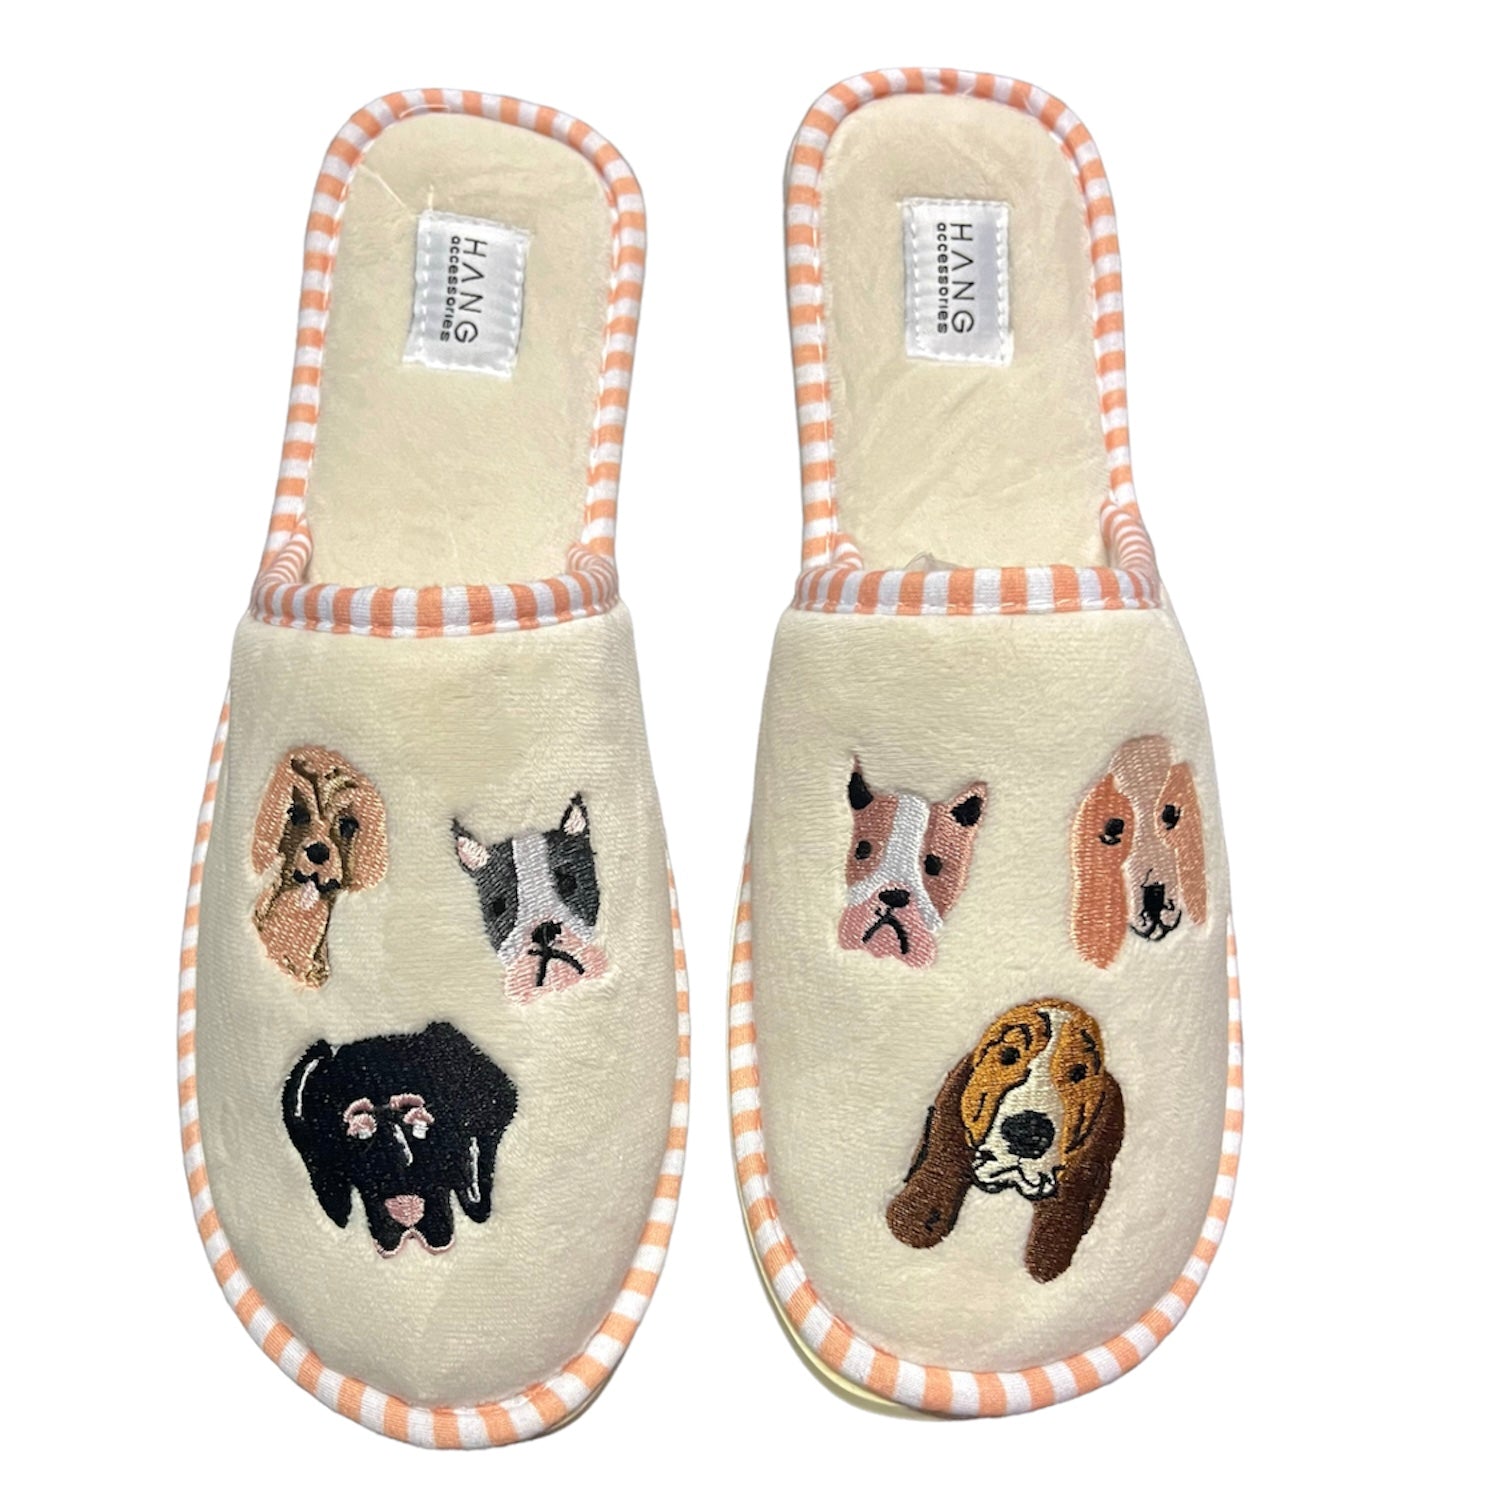 Travel Slippers - Dogs